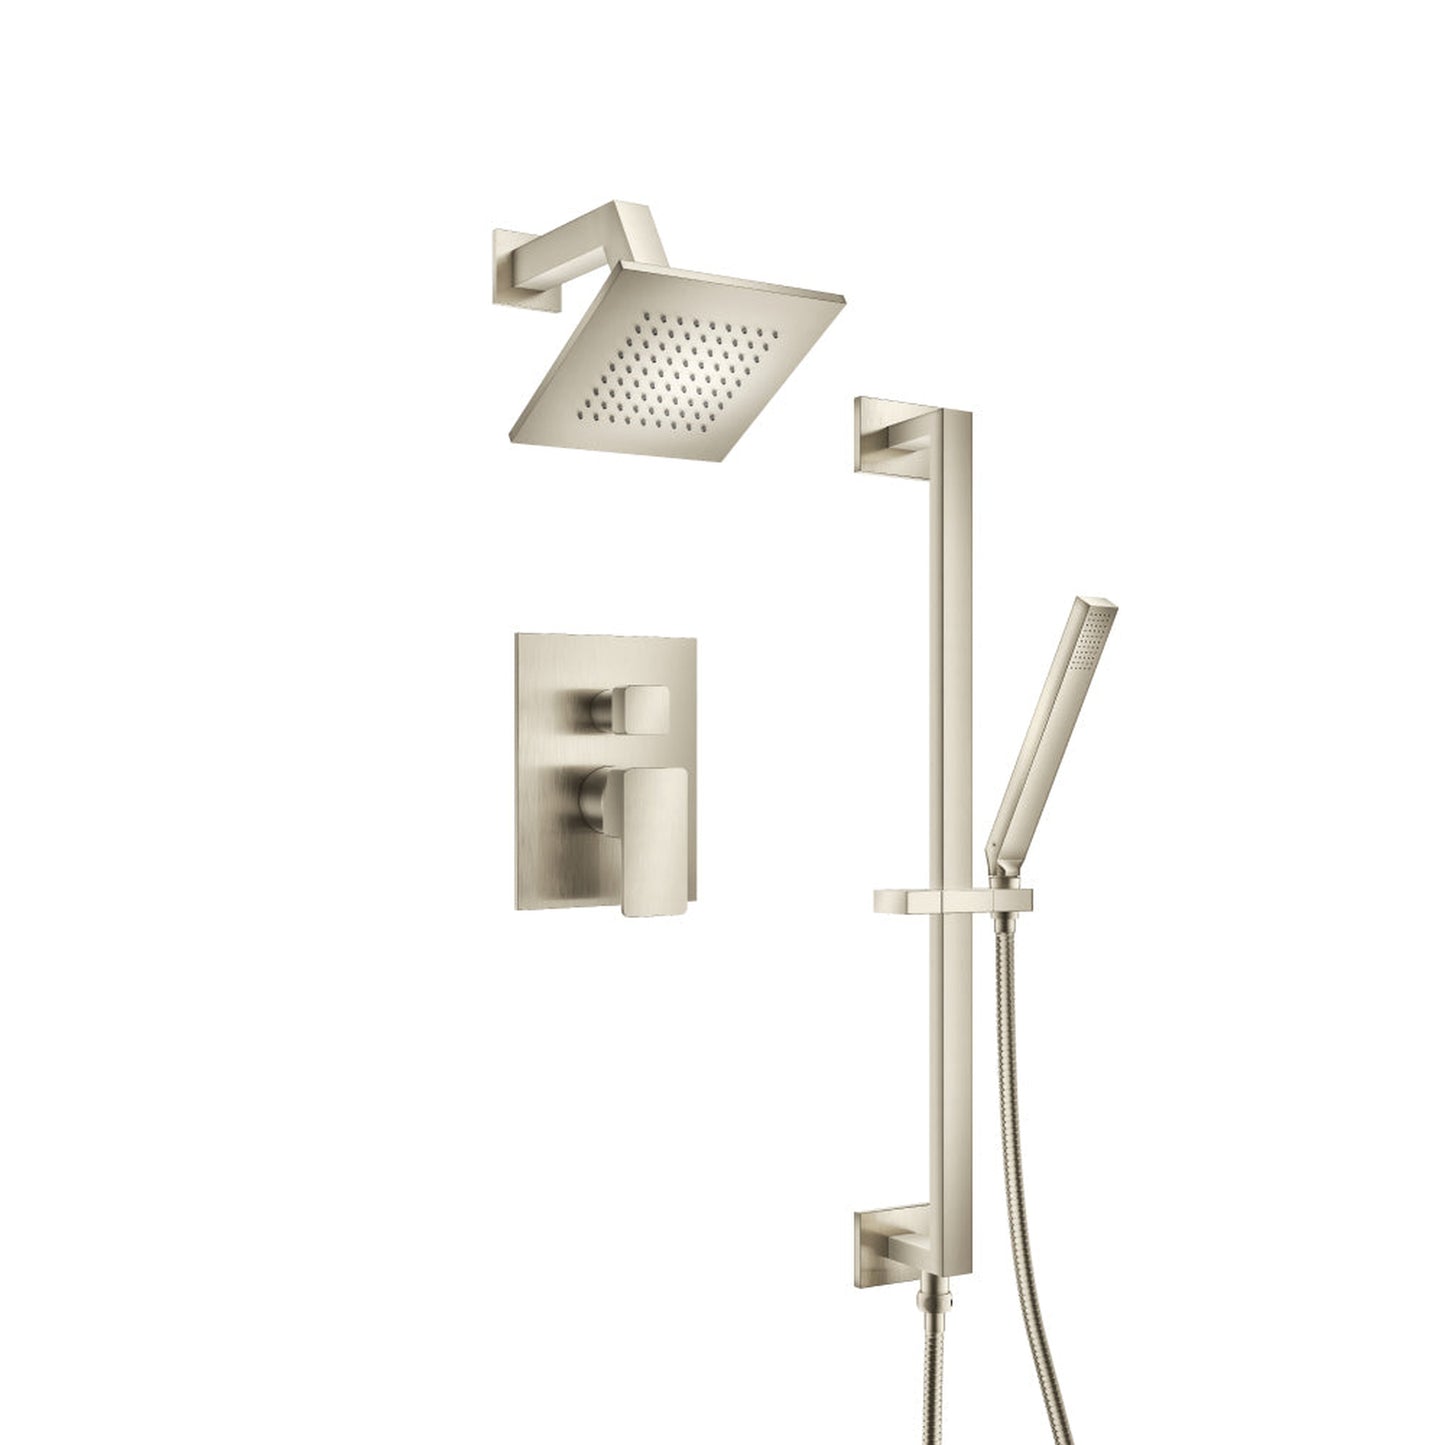 Isenberg Serie 196 Two Output Shower Set With Shower Head, Hand Held and Slide Bar in Brushed Nickel (196.3400BN)